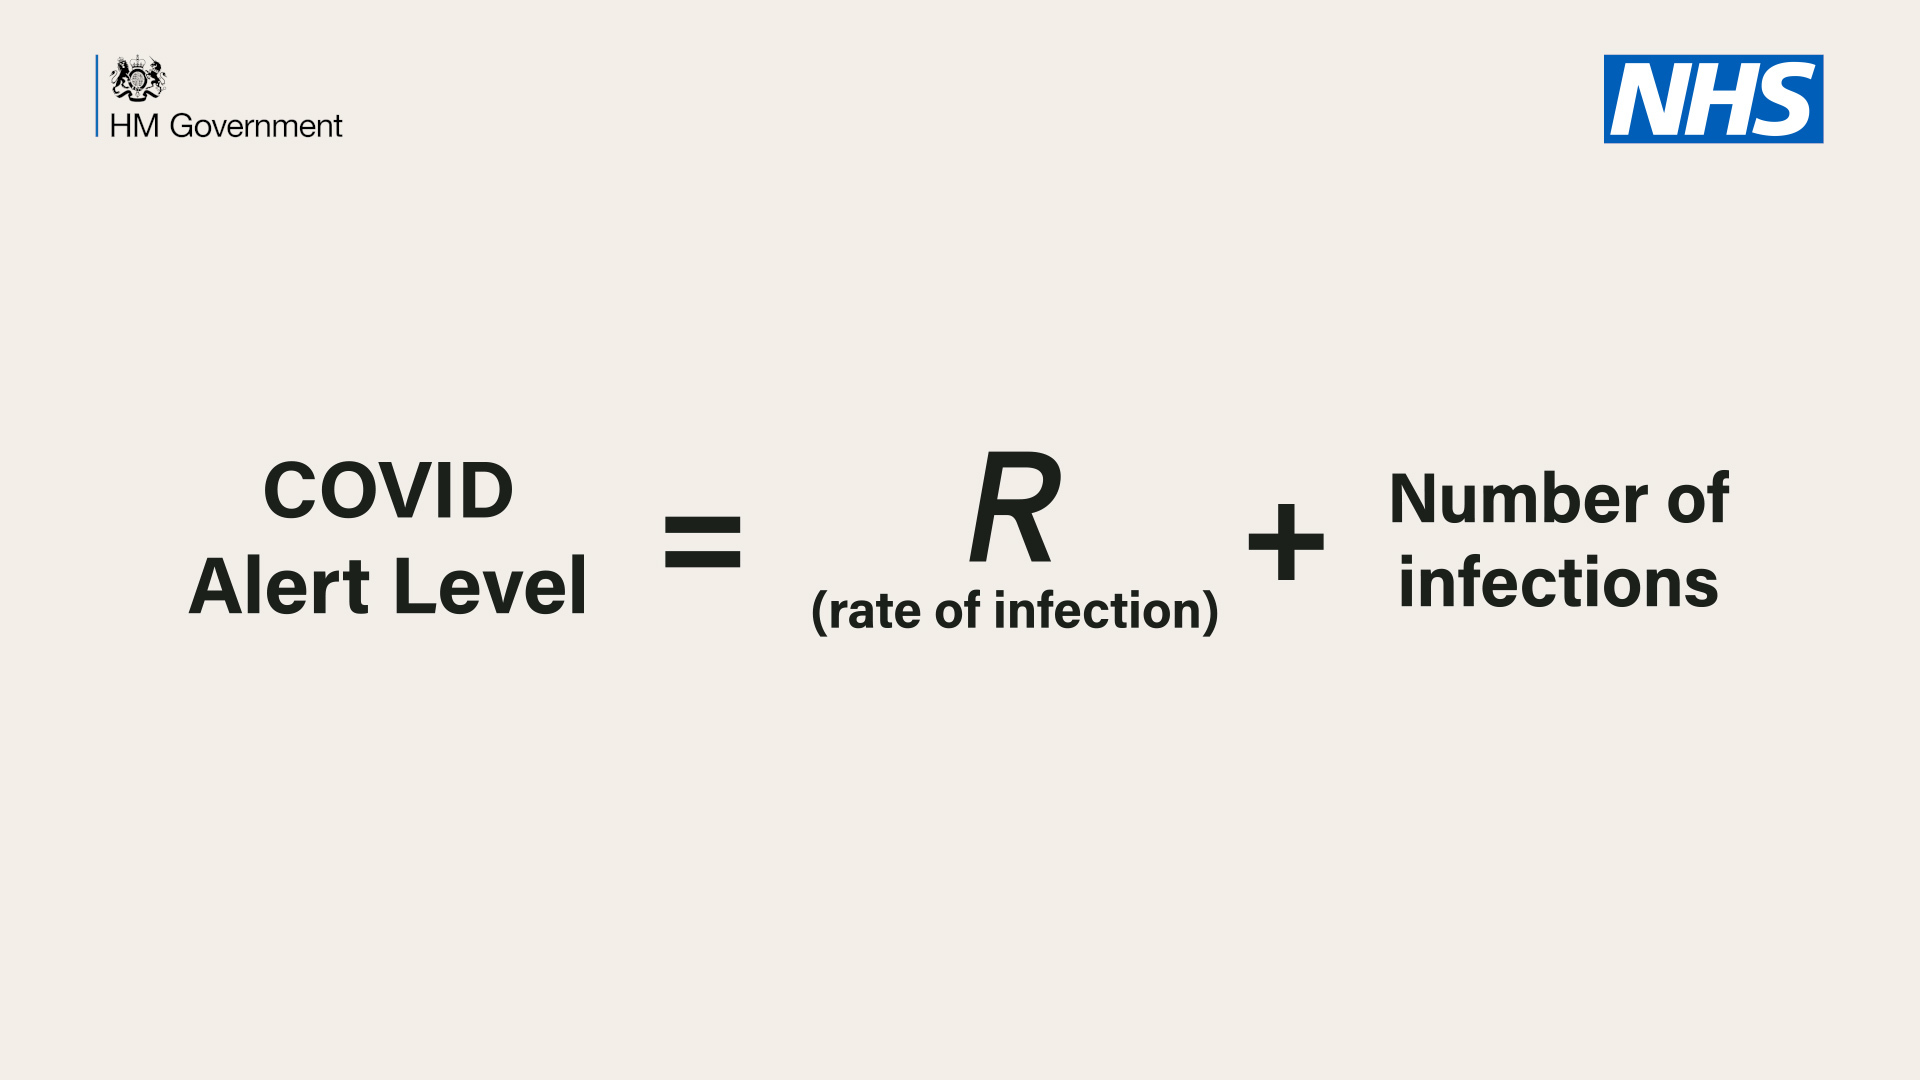 COVID alert level = R + Number of infections